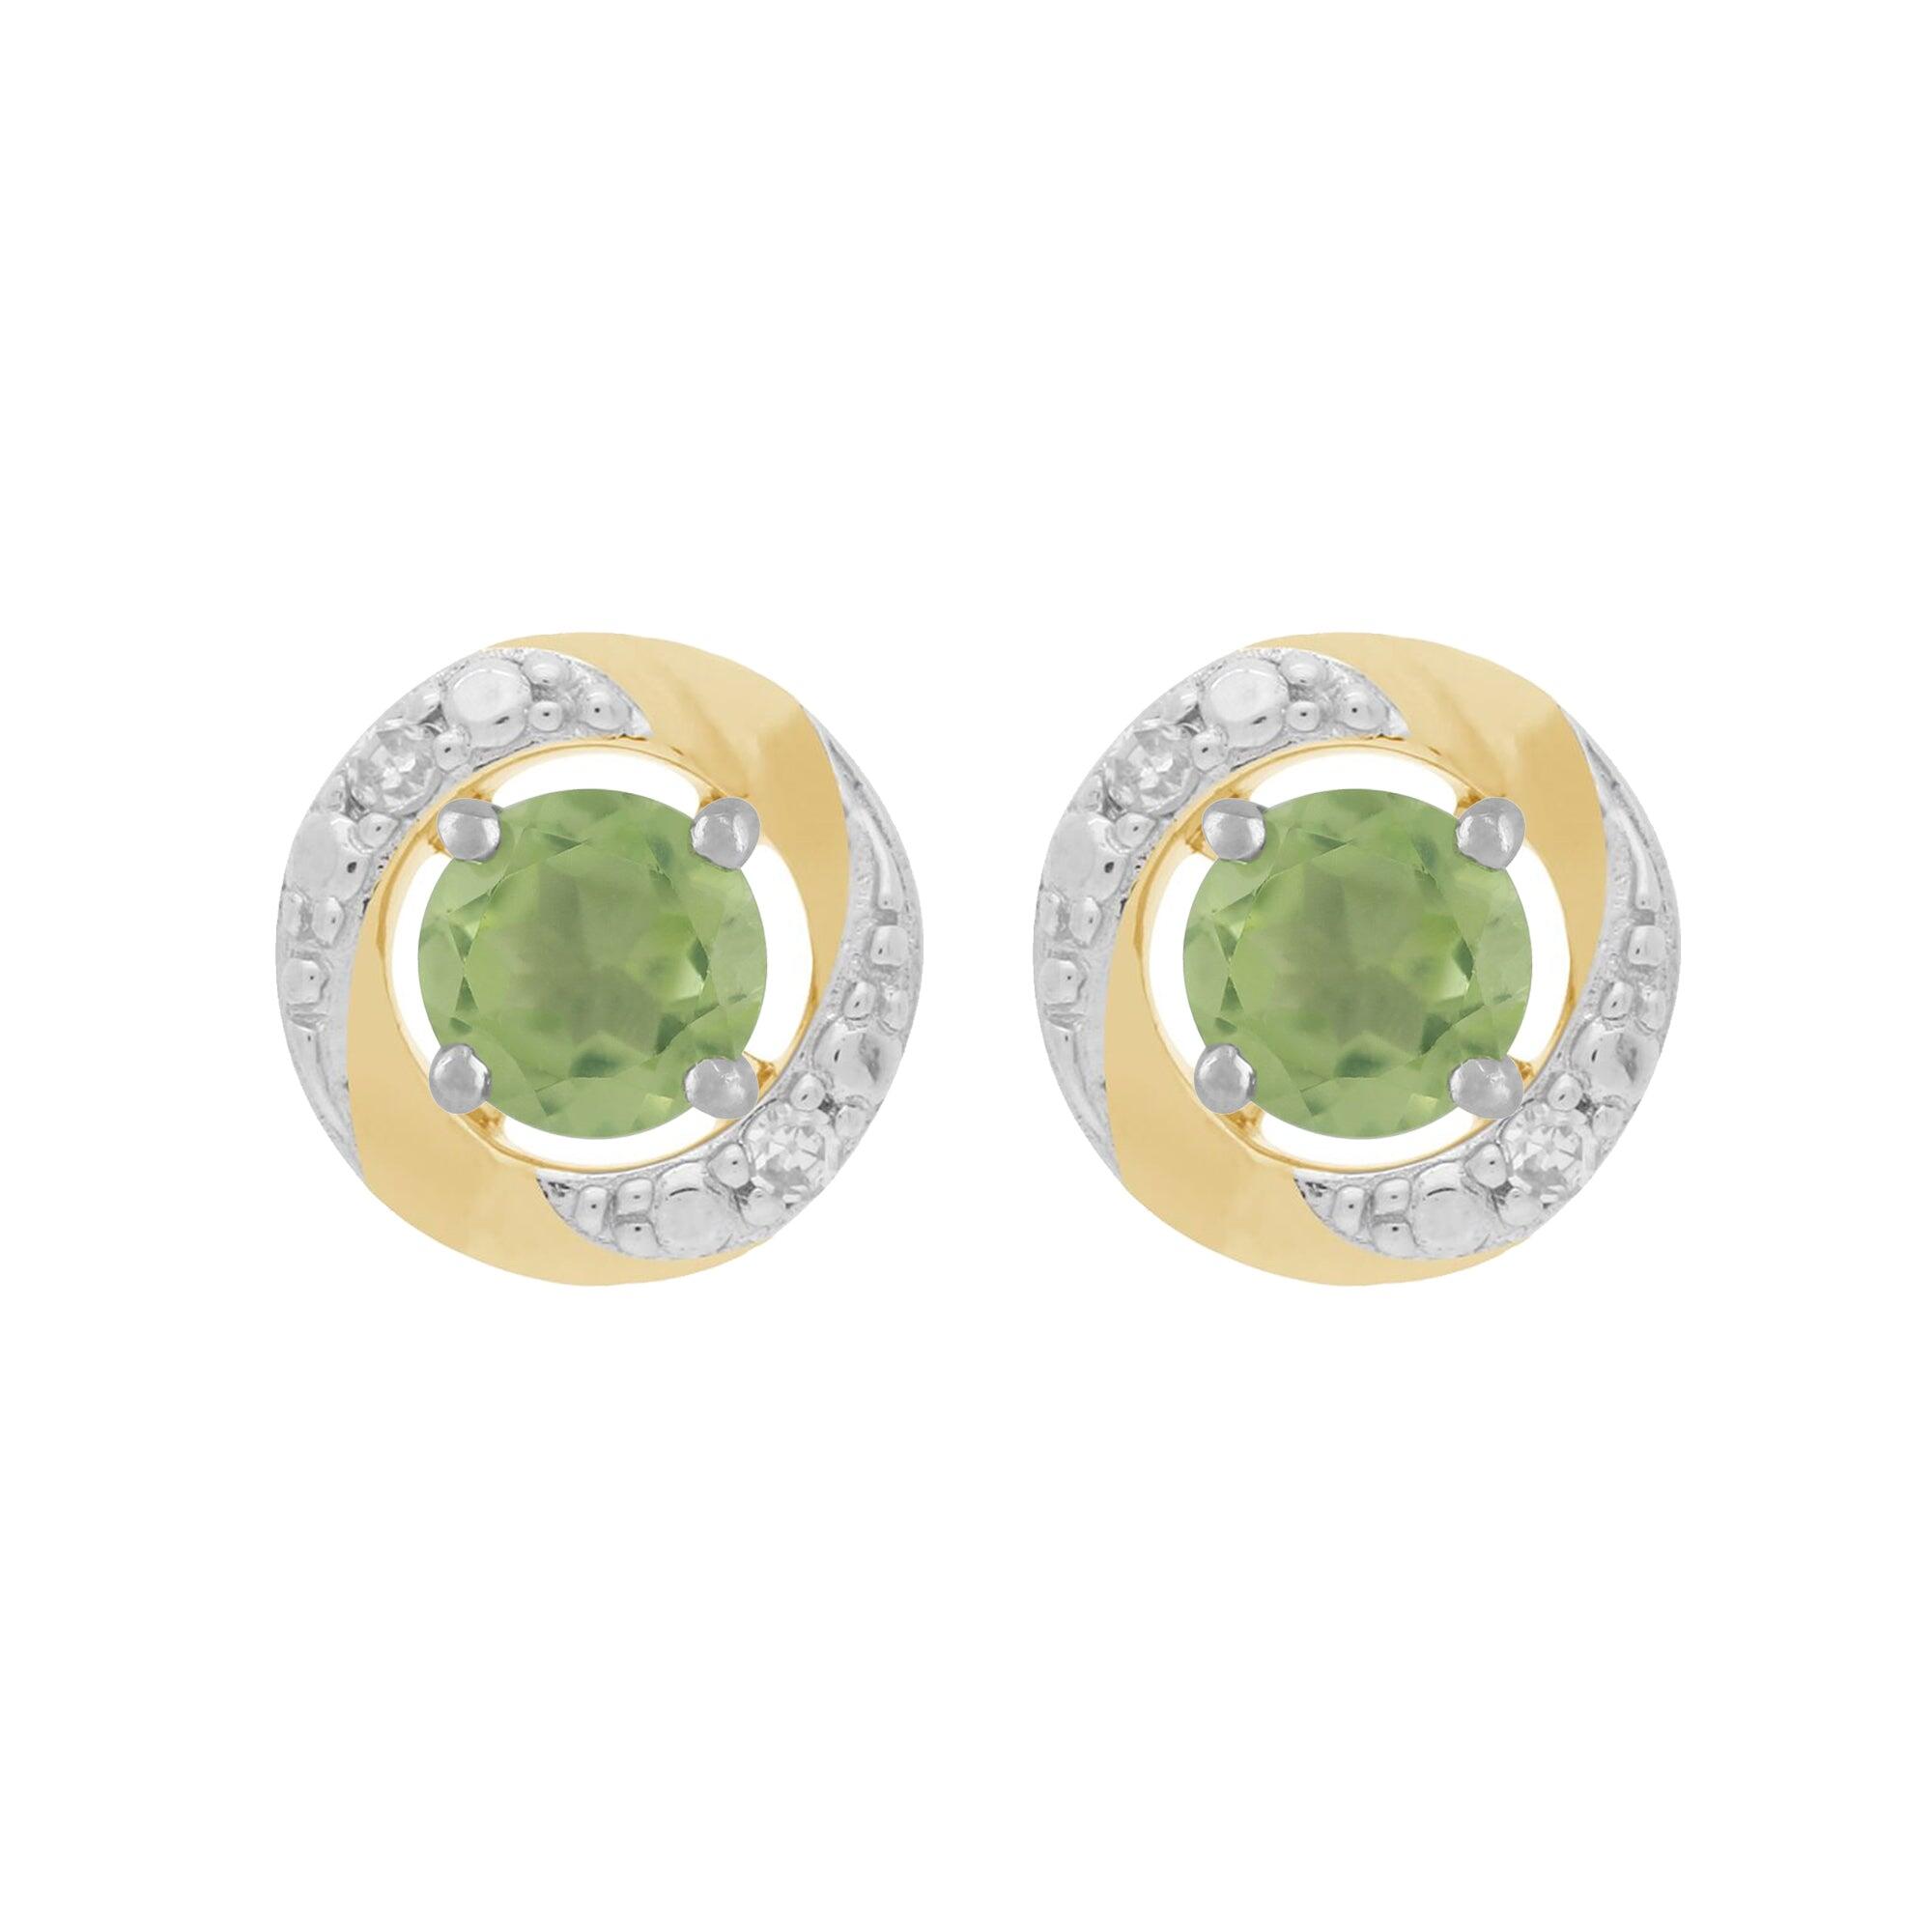 9ct White Gold Peridot Stud Earrings with Detachable Diamond Halo Ear Jacket in 9ct Yellow Gold